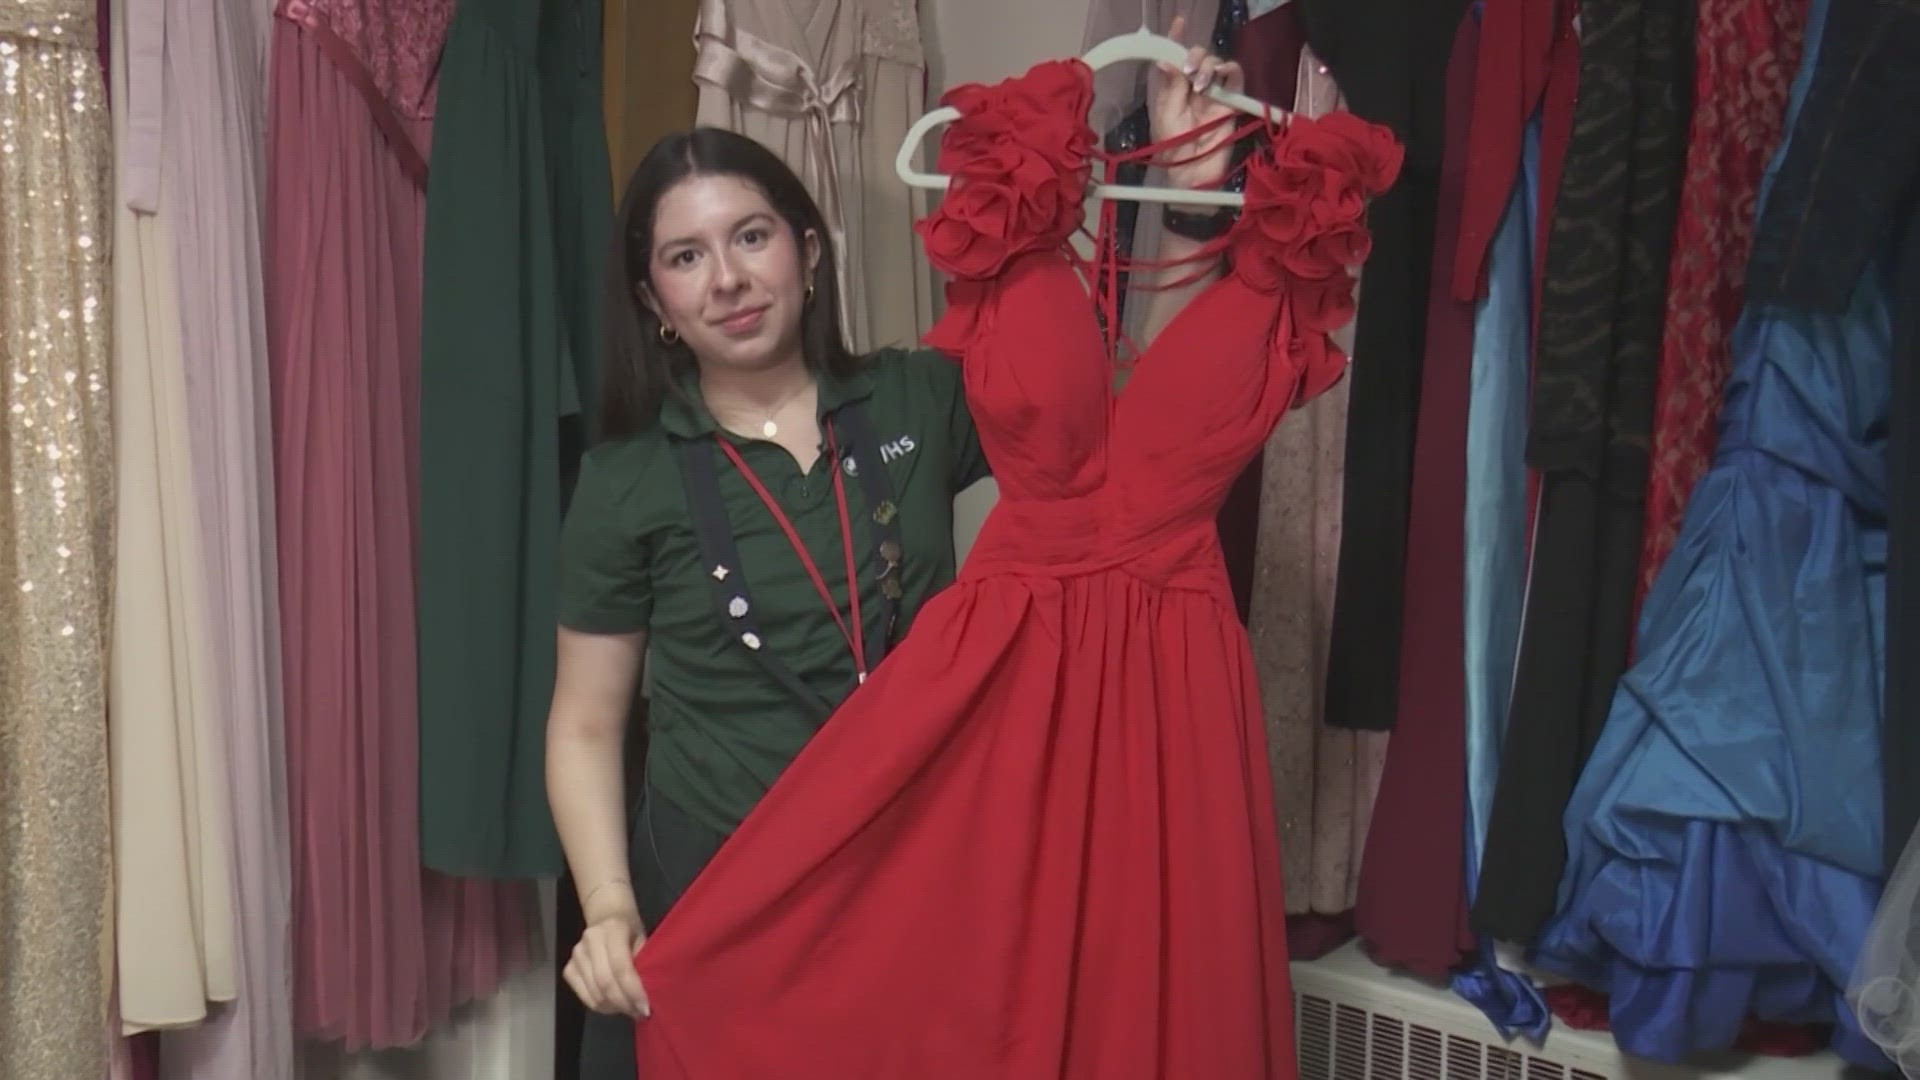 Local high schooler playing fairy godmother, collecting and donating dresses to students